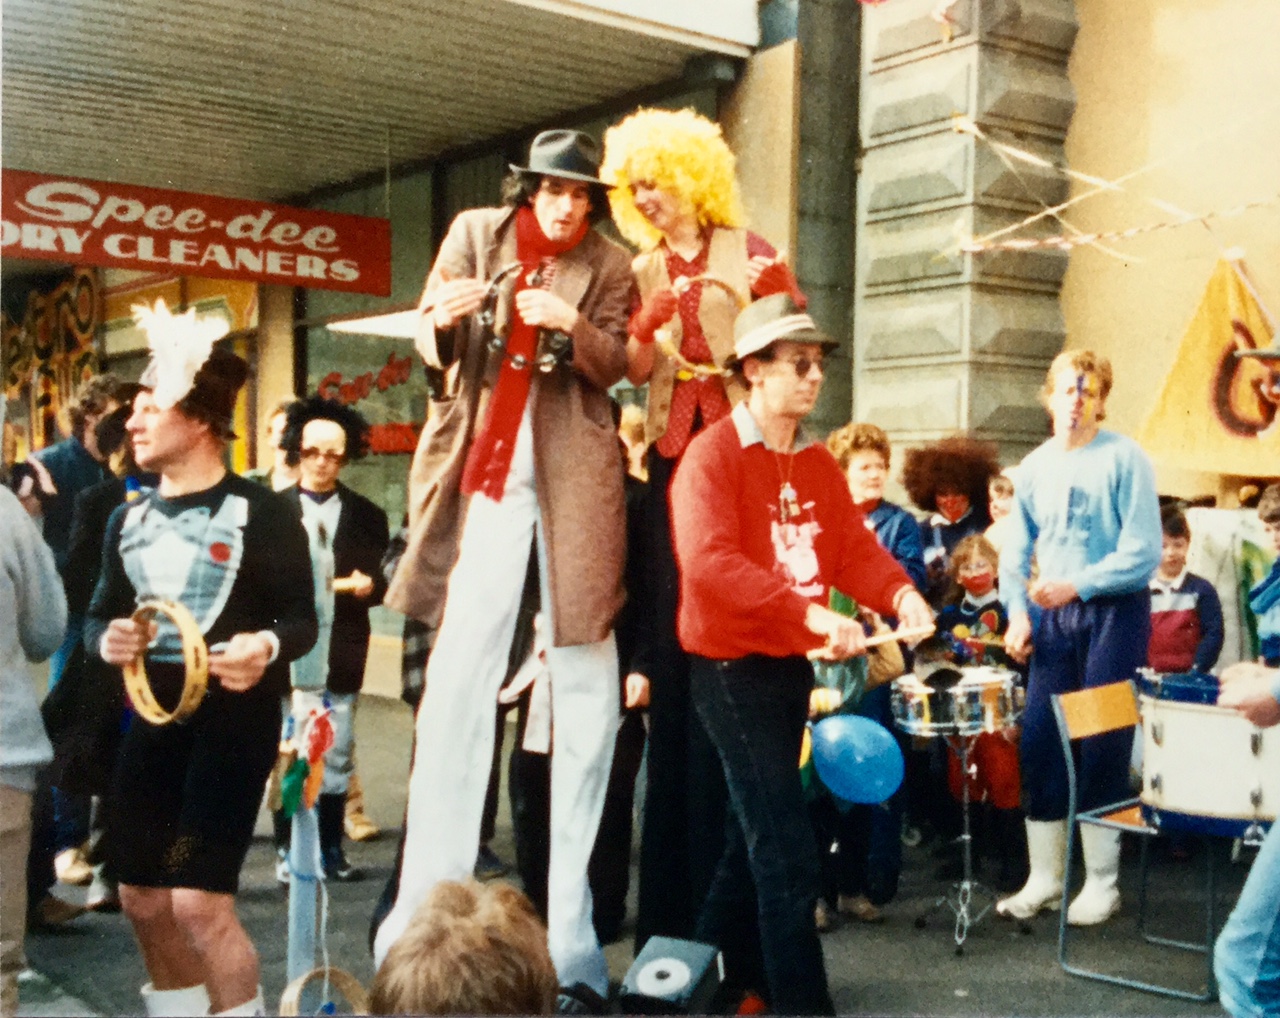 Opening of New Wave Festival 1985, outside front of Art Gallery of Ballarat source Merle Hathaway